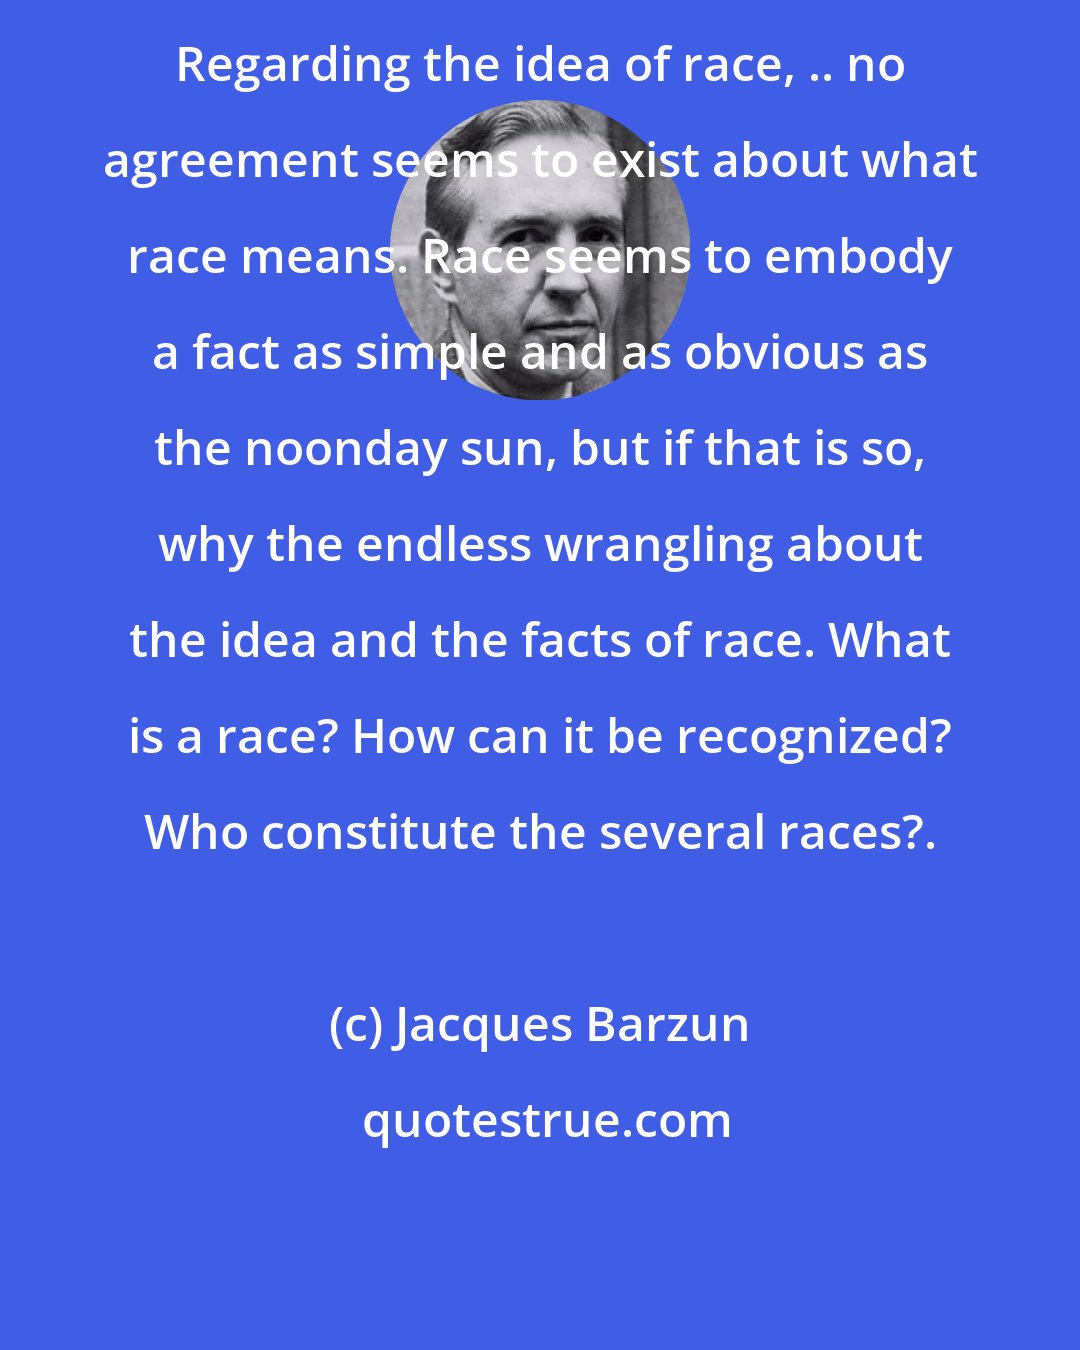 Jacques Barzun: Regarding the idea of race, .. no agreement seems to exist about what race means. Race seems to embody a fact as simple and as obvious as the noonday sun, but if that is so, why the endless wrangling about the idea and the facts of race. What is a race? How can it be recognized? Who constitute the several races?.